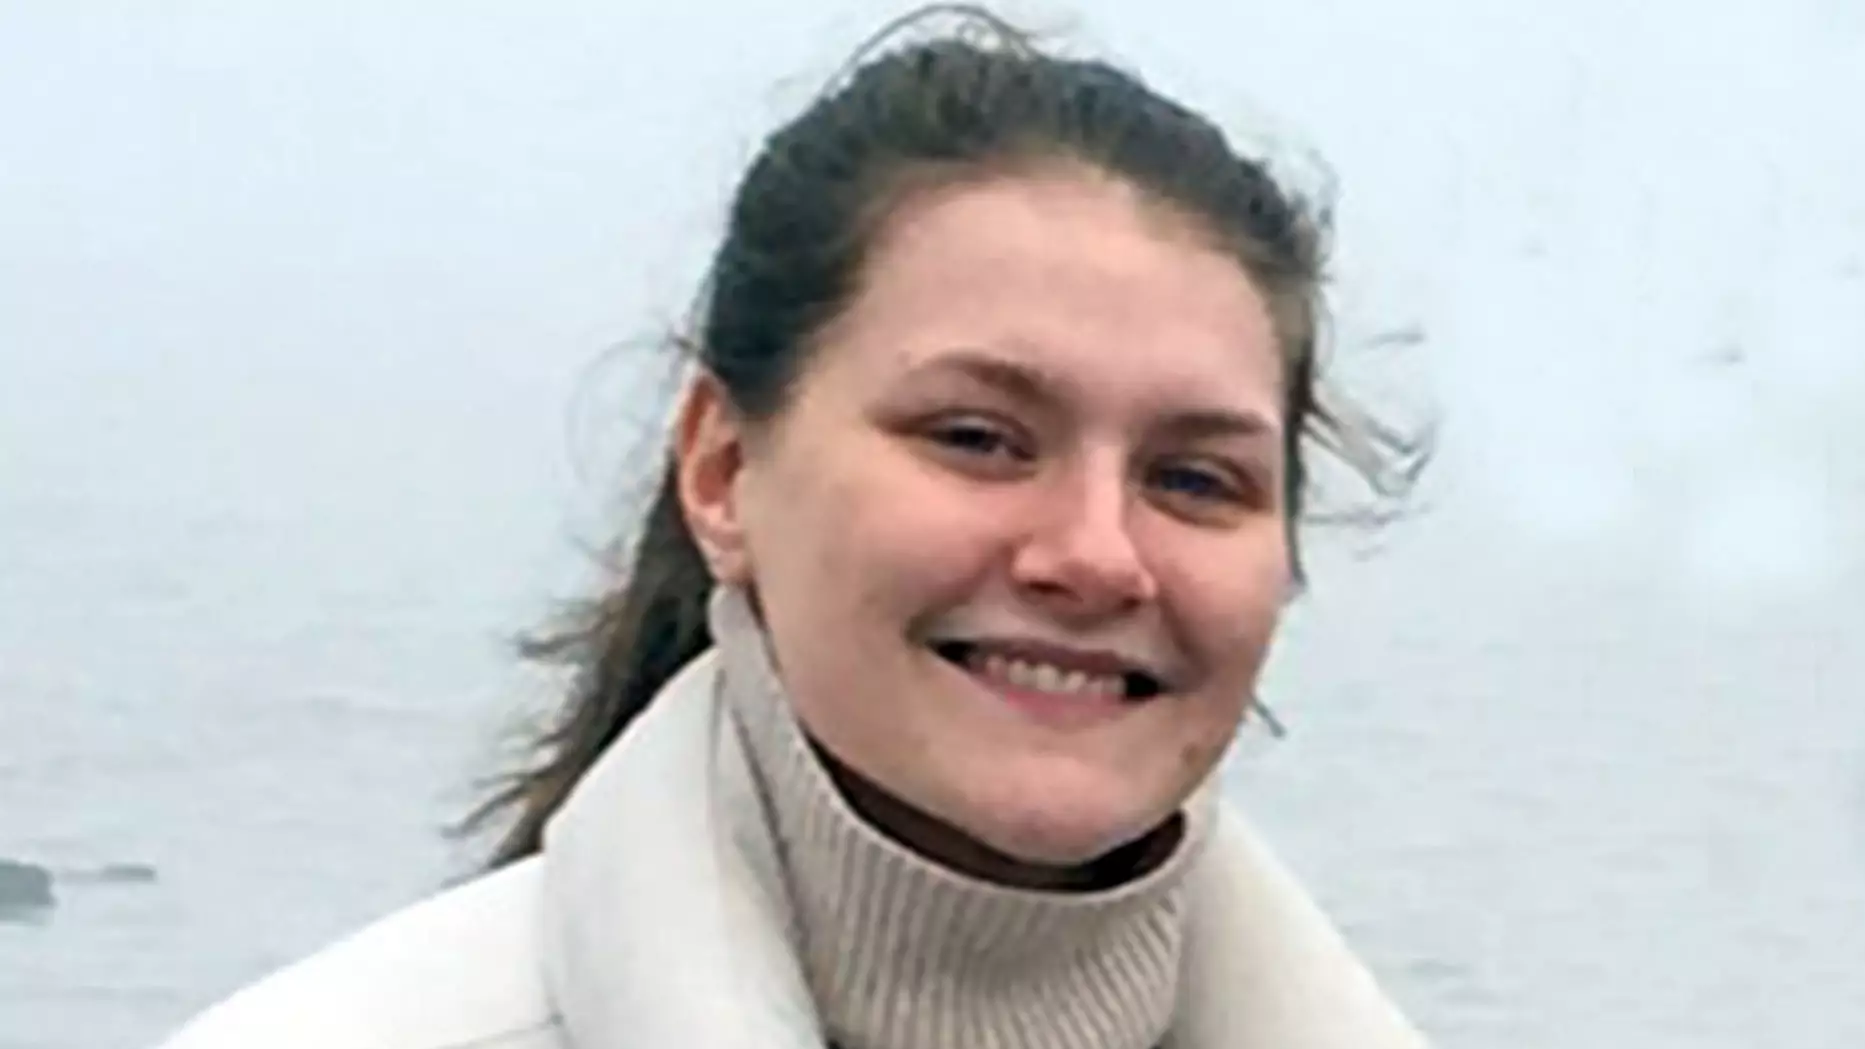 Libby Squire was killed in 2019 (